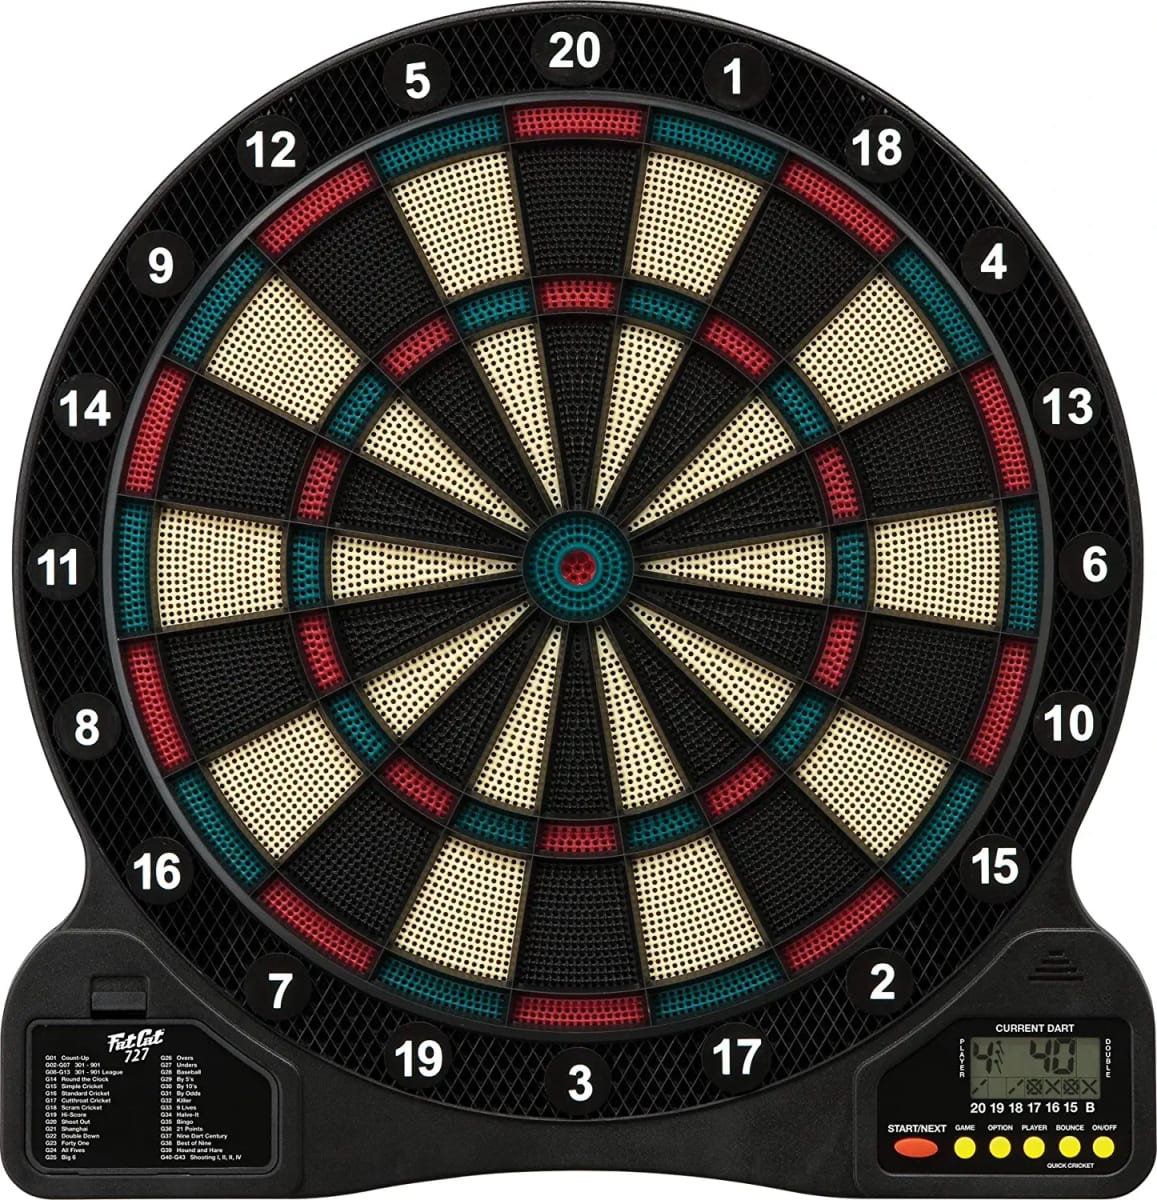 Fat Cat by GLD Products 727 Electronic Dartboard Value Size Over 15 Games and 132 Options Auto-Scoring Compact Display with Missed-Dart Throw Catch Ring Soft Tip Darts and Extra Points Battery Operated